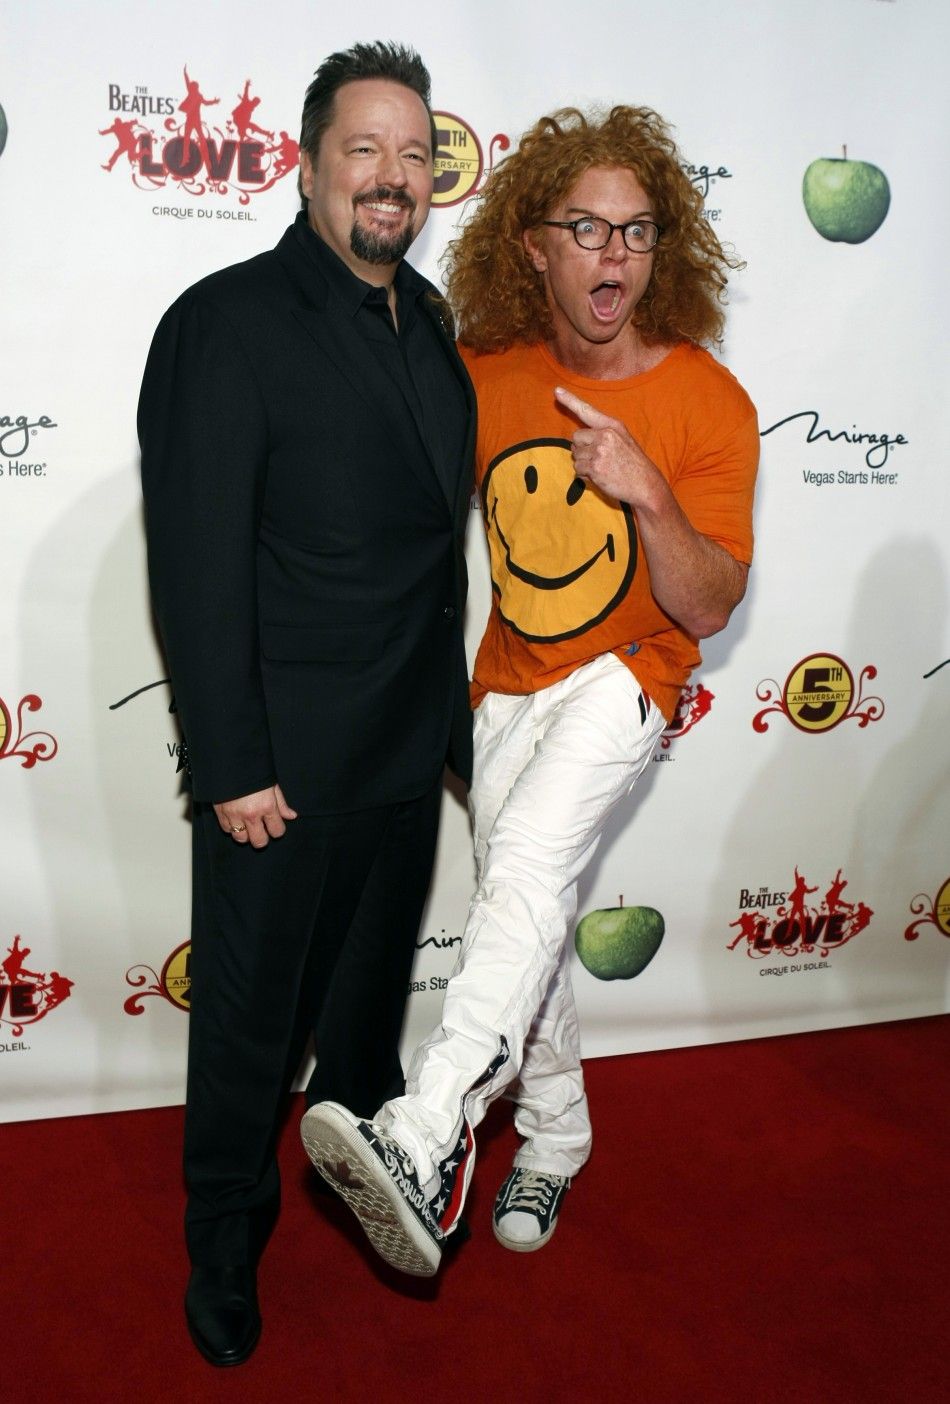 Ventriloquist Terry Fator and comedian Carrot Top R arrive for the fifth anniversary celebration of quotThe Beatles LOVE by Cirque du Soleilquot show at the Mirage Hotel and Casino in Las Vegas, Nevada June 8, 2011.